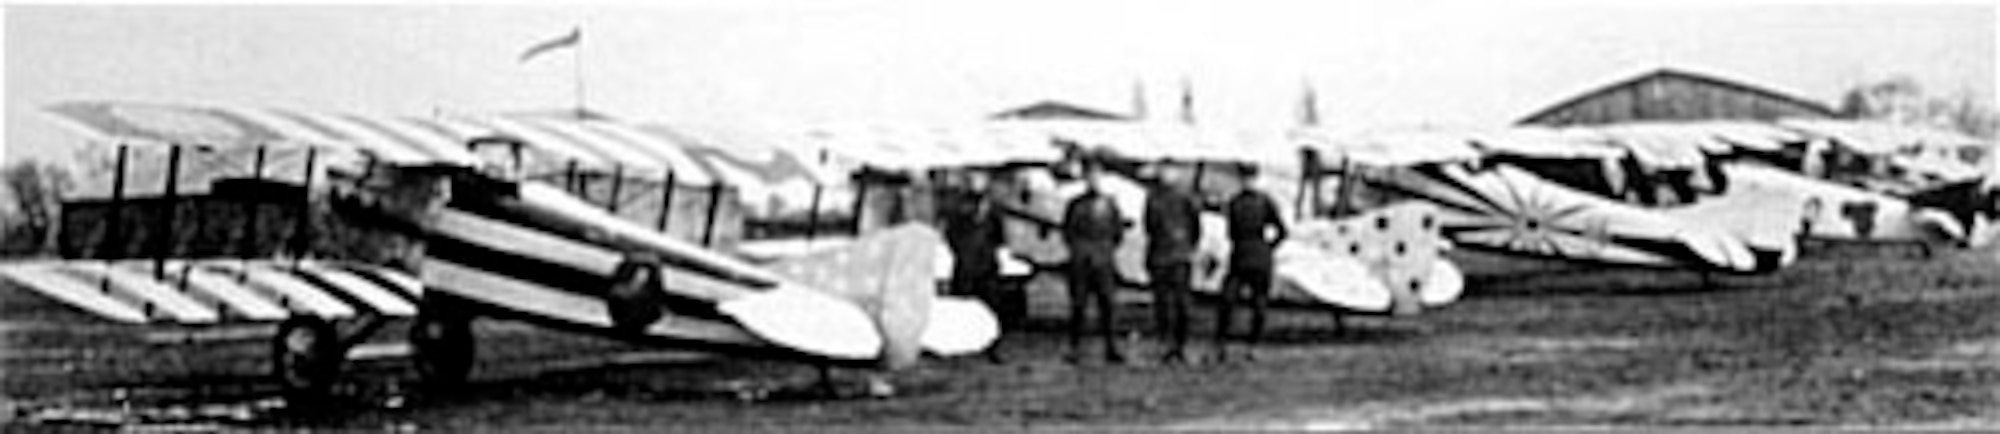 After the 94th Aero Squadron arrived at Koblenz, it painted its SPAD XIIIs in extremely gaudy colors in preparation for flying them to Paris for the French-sponsored pennant presentation ceremony on April 12, 1919. The pilots flew as far as Toul before inclement weather grounded them; they had to complete their trip to Paris by train. (U.S. Air Force photo)